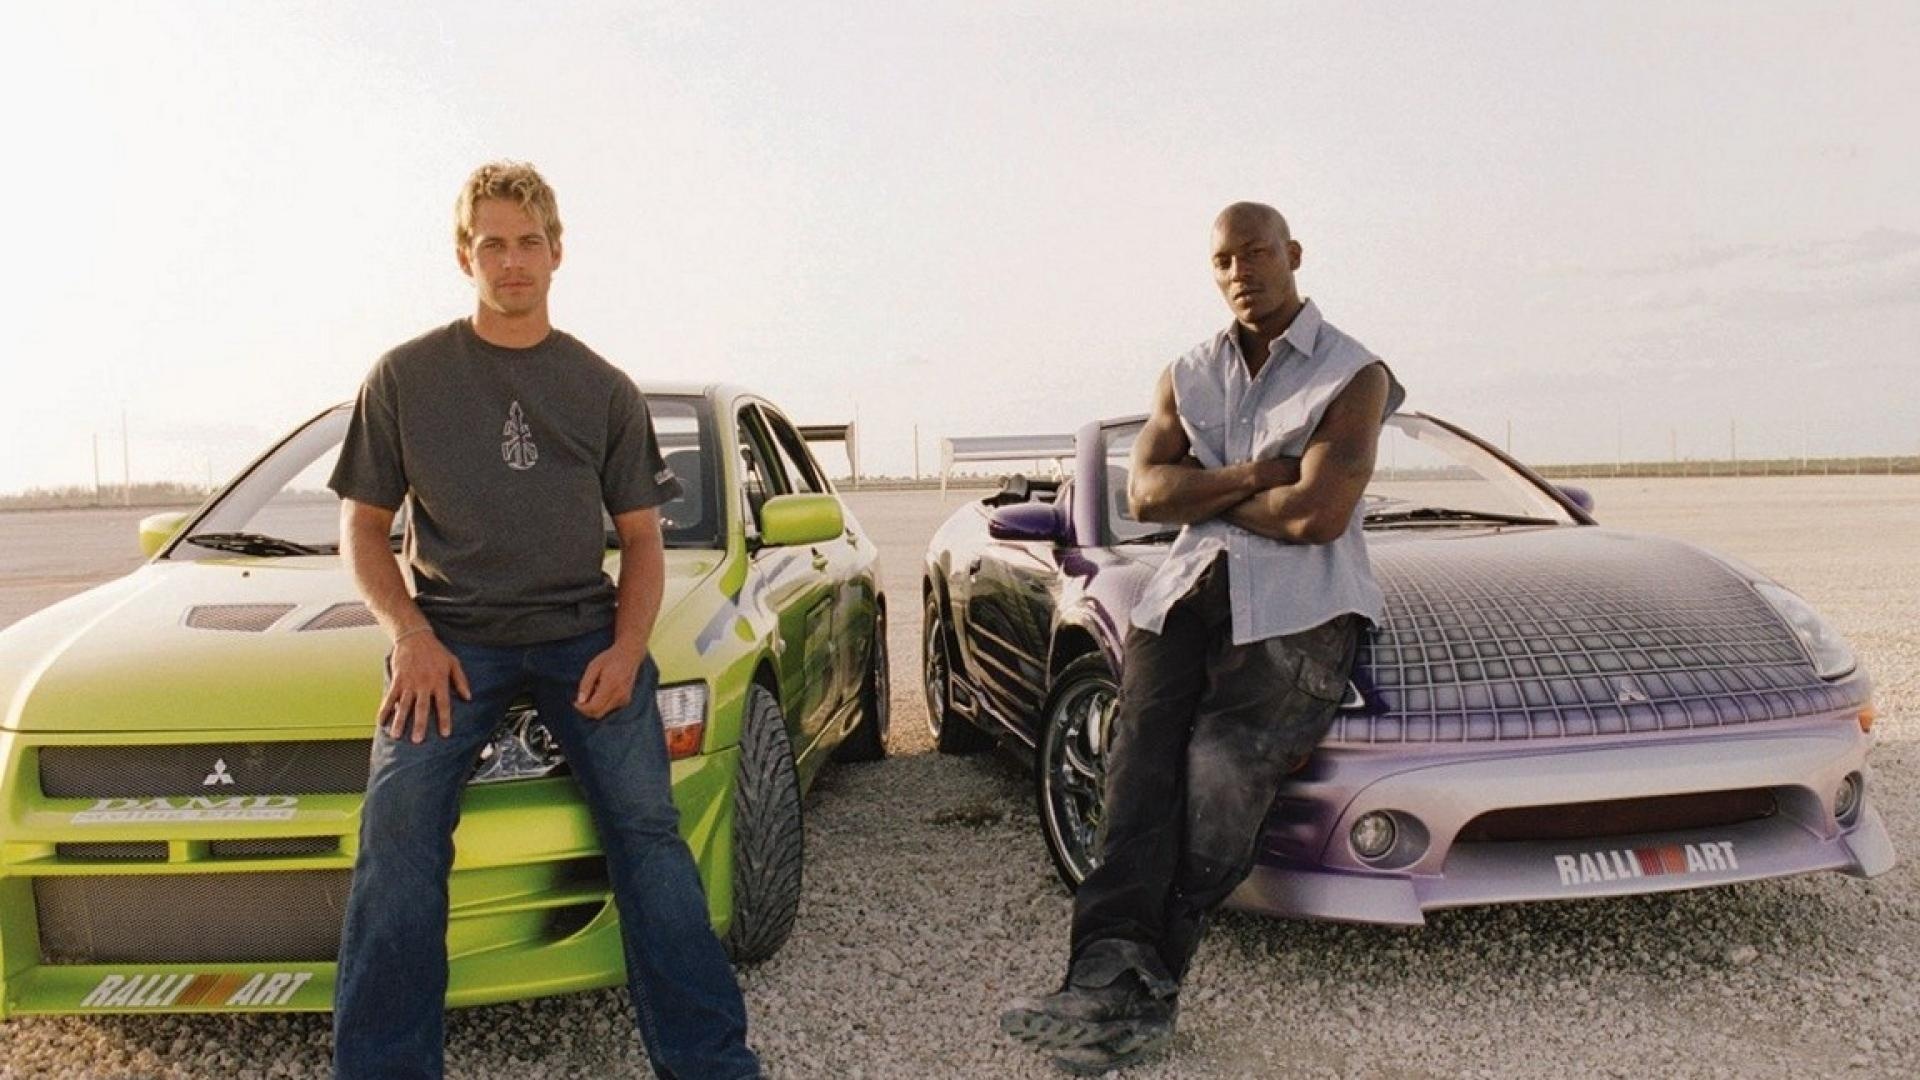 Fast and Furious Backgrounds, Tyrese Gibson, Action-Packed Scenes, 1920x1080 Full HD Desktop